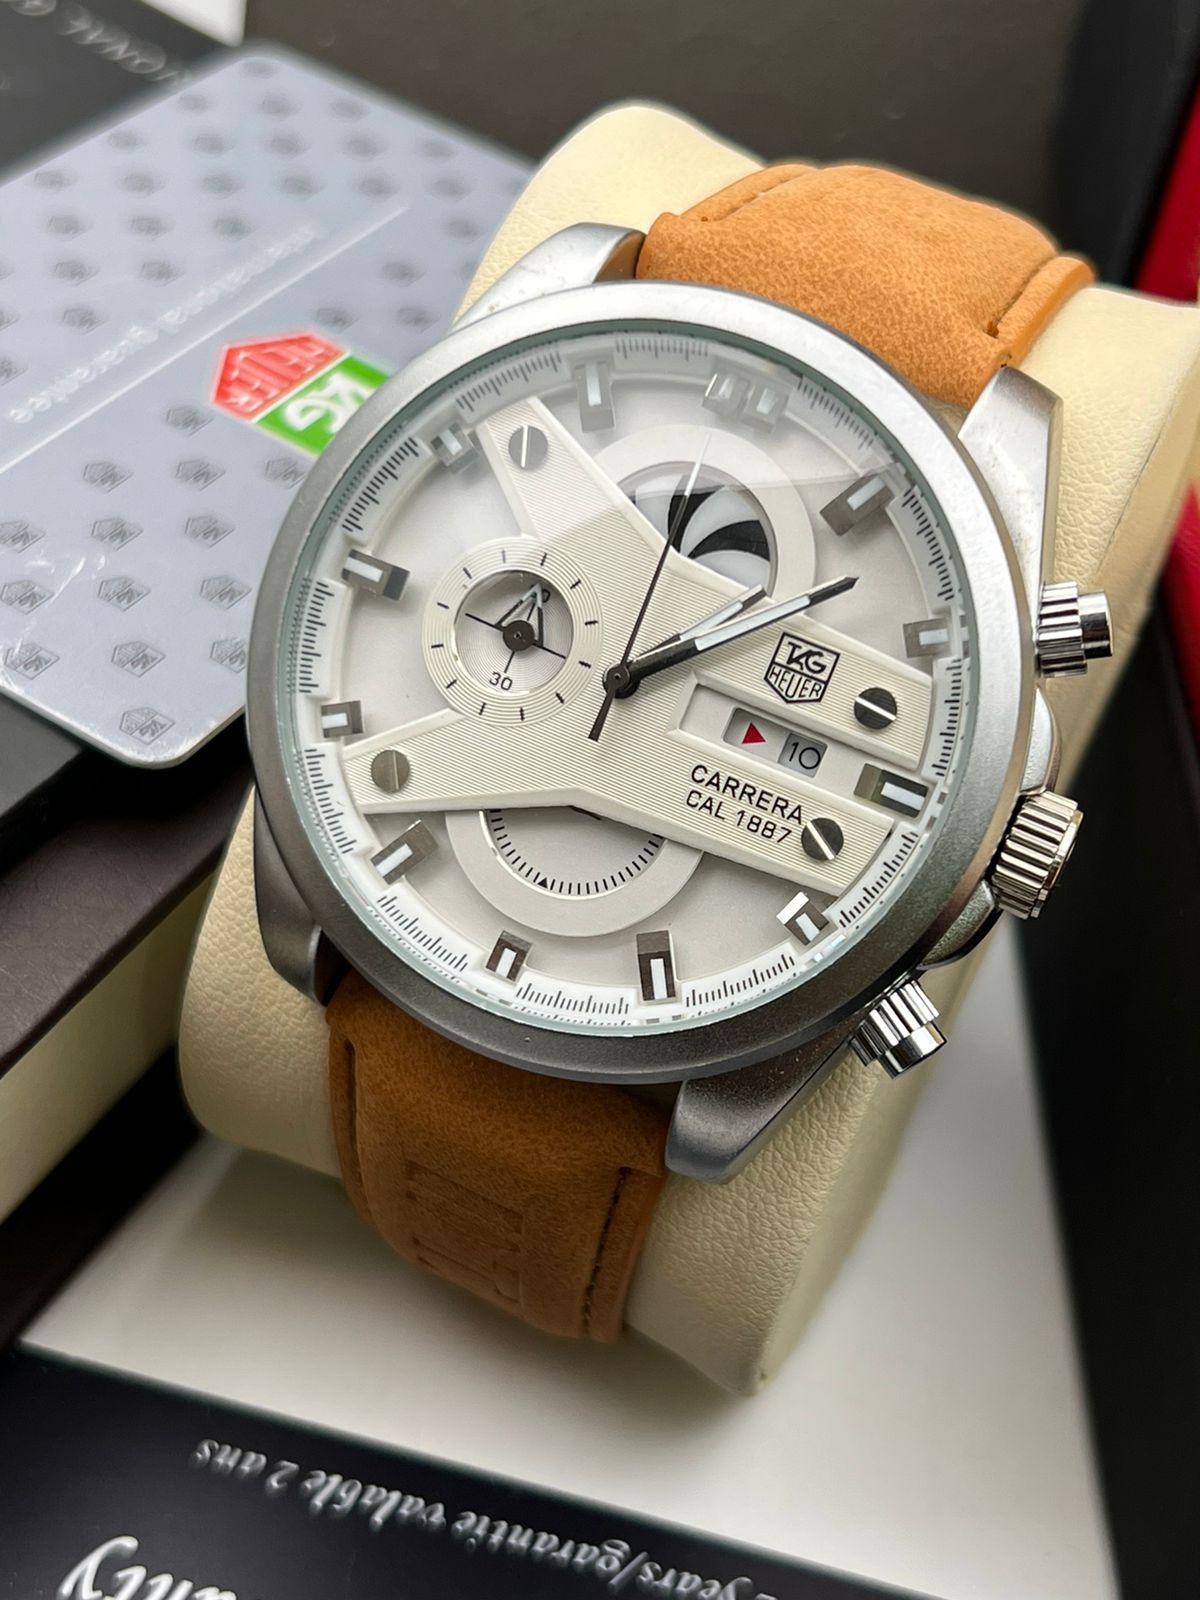 Tagheuer- Grand Carriera Cr7-Diagno TAG-1887-CR7 White Chronograph Multi Dial With Metal Case & Leather Strap Men's Watch - Best Formal Look Watch